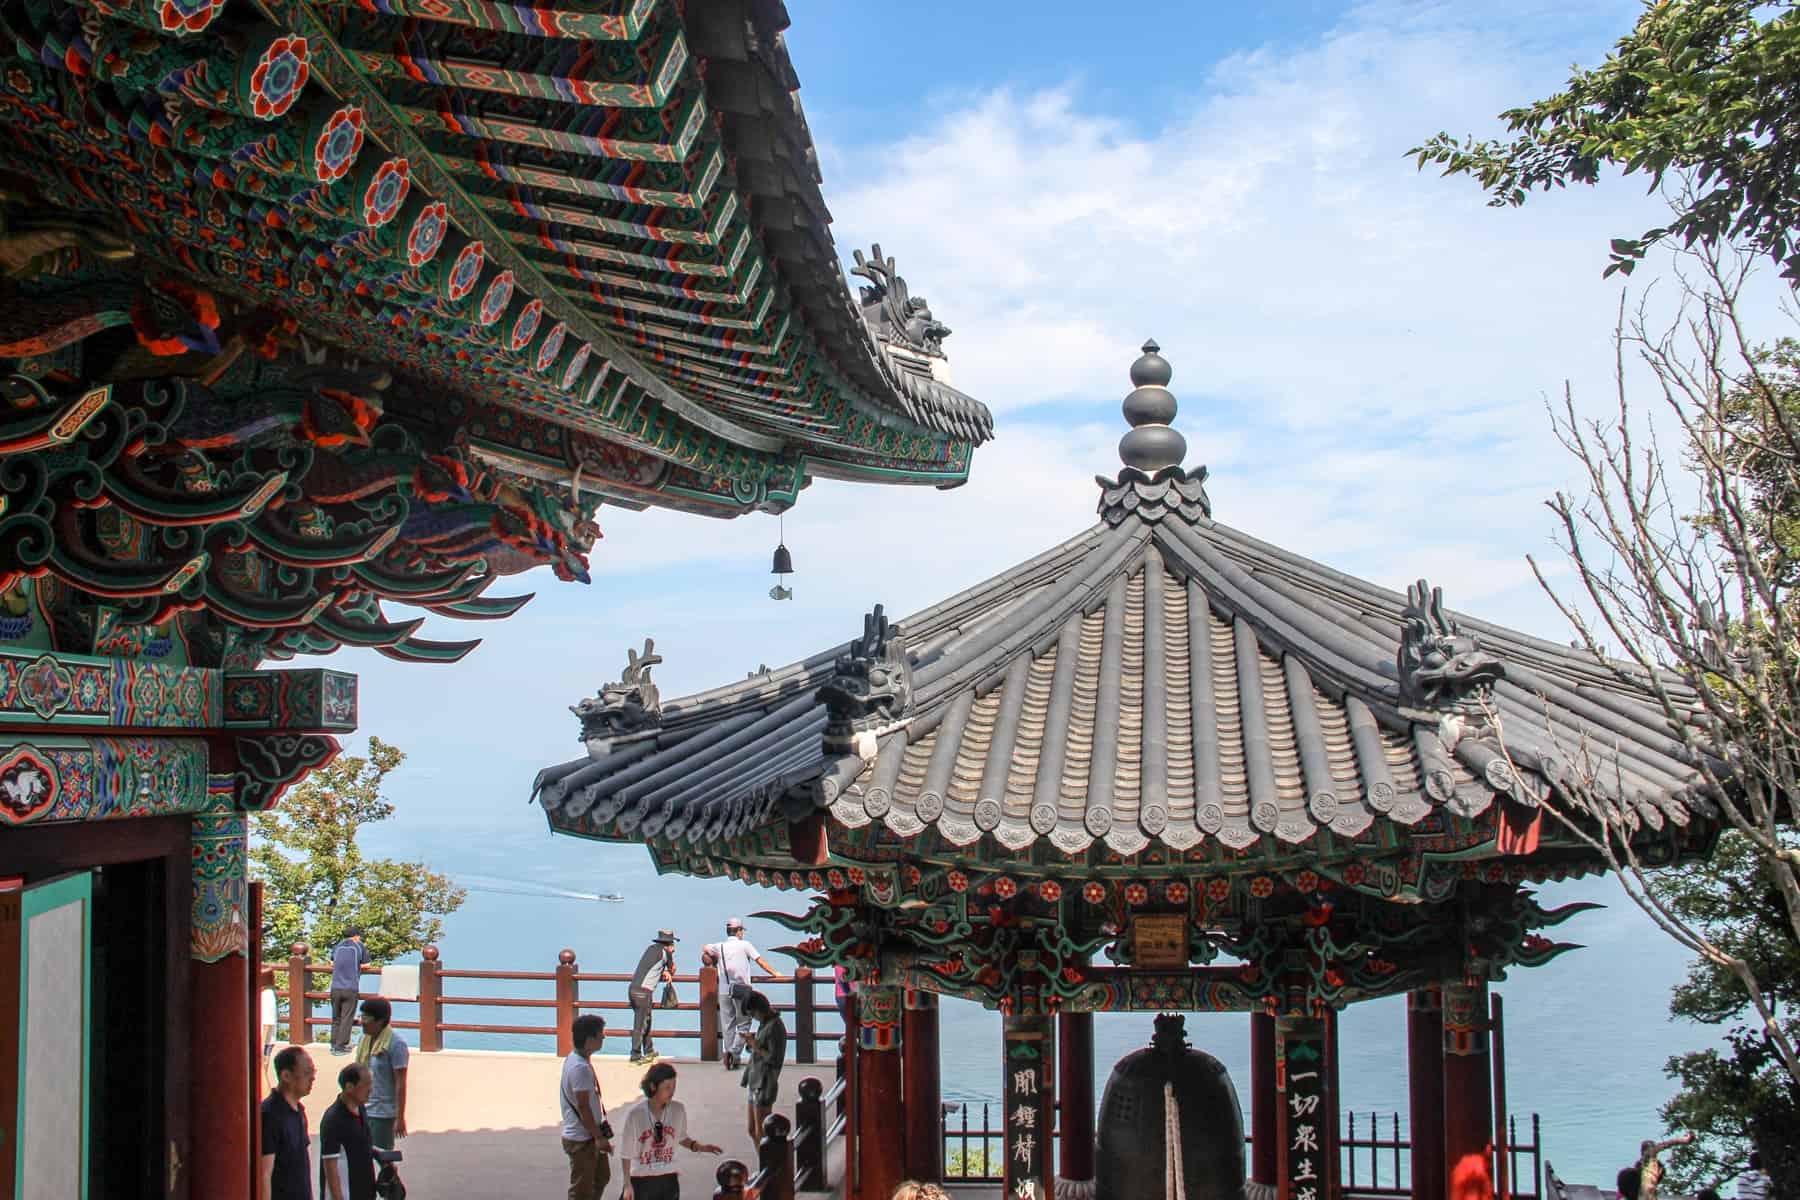 The colourful painted wood roof of Geomosan Hyangilam temple in Yeosu, with a view overlooking the ocean. 